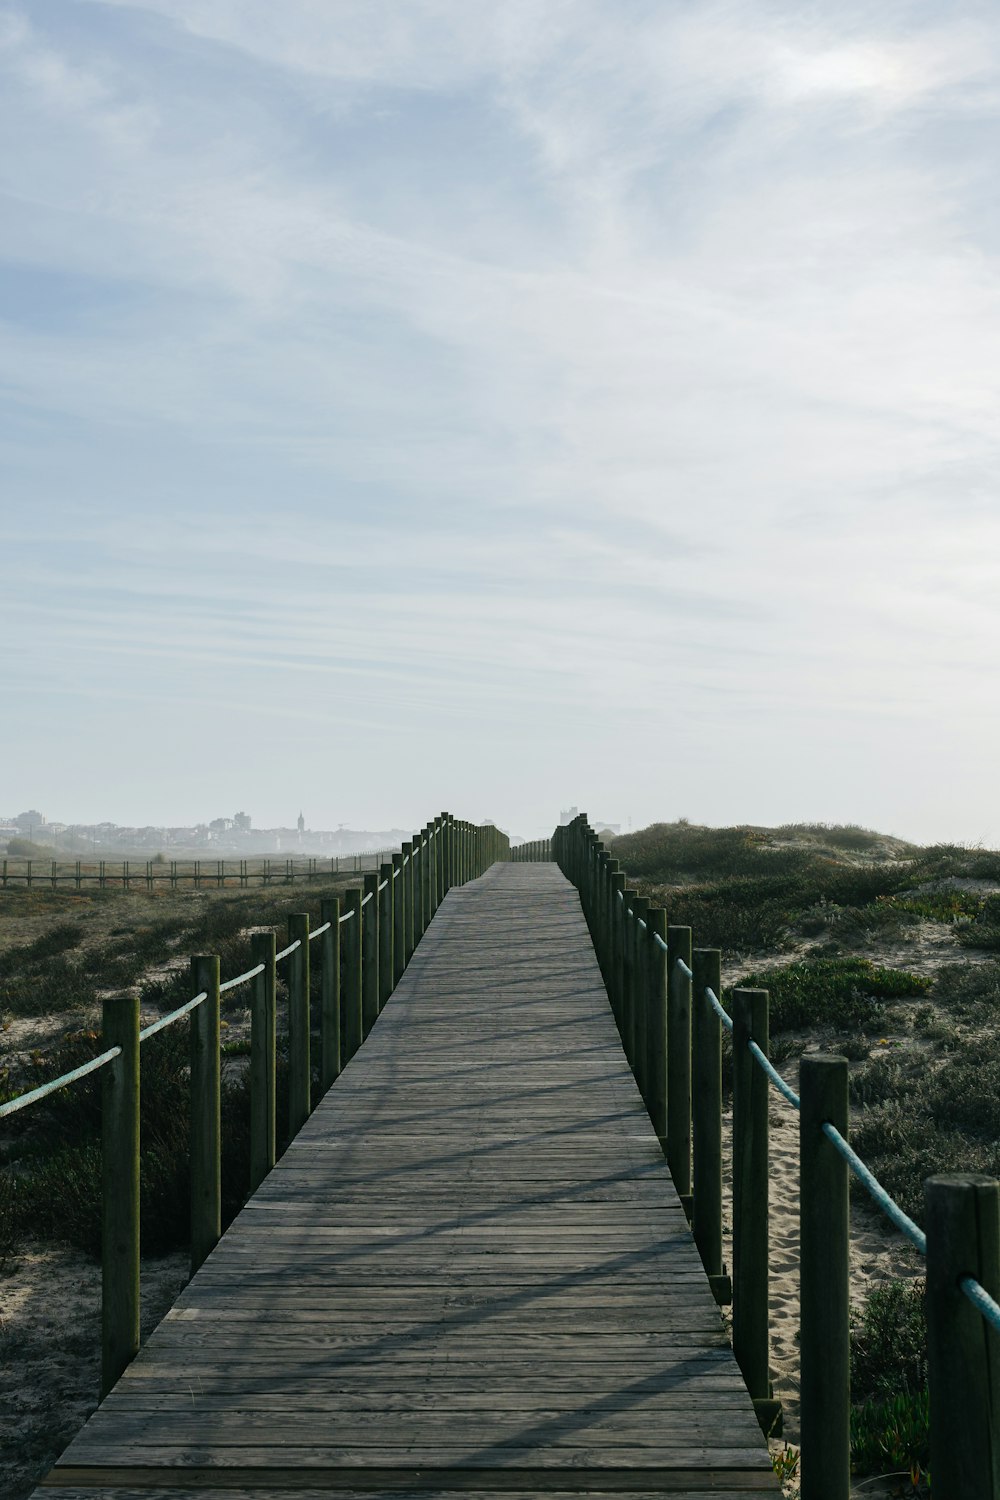 a wooden walkway leading to a sandy beach